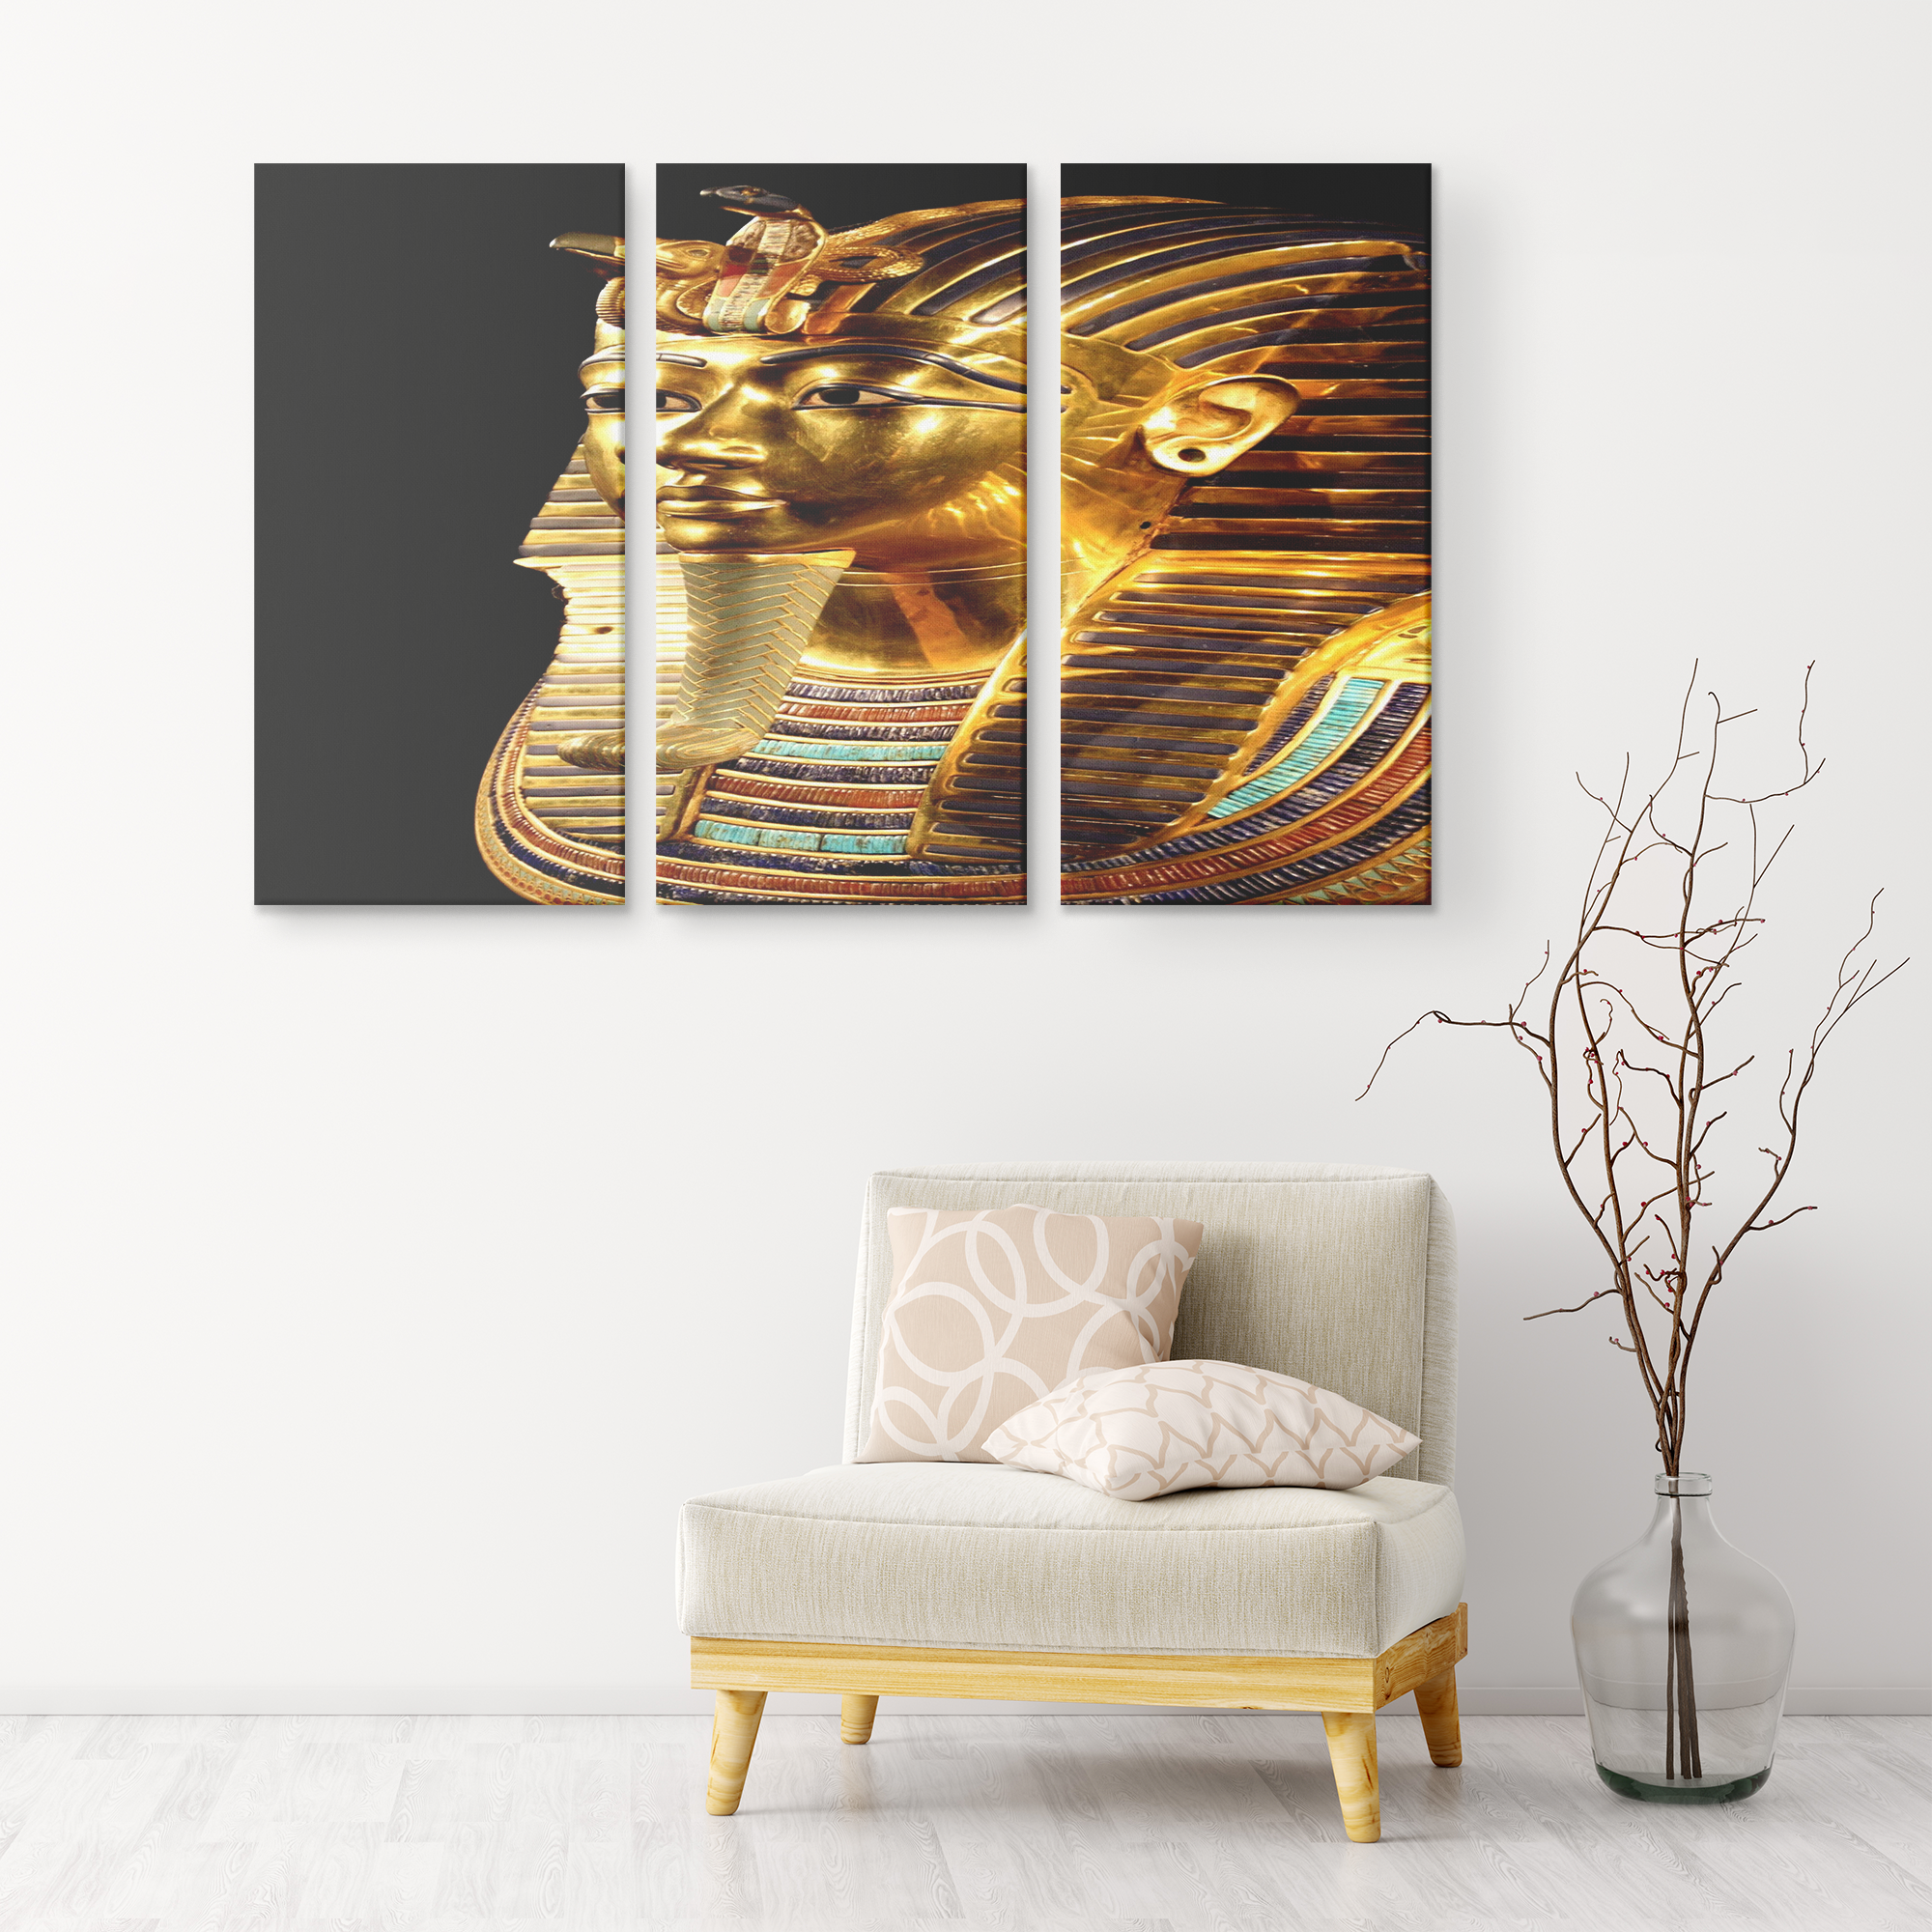 The King in Pure Gold 3-Set Canvas